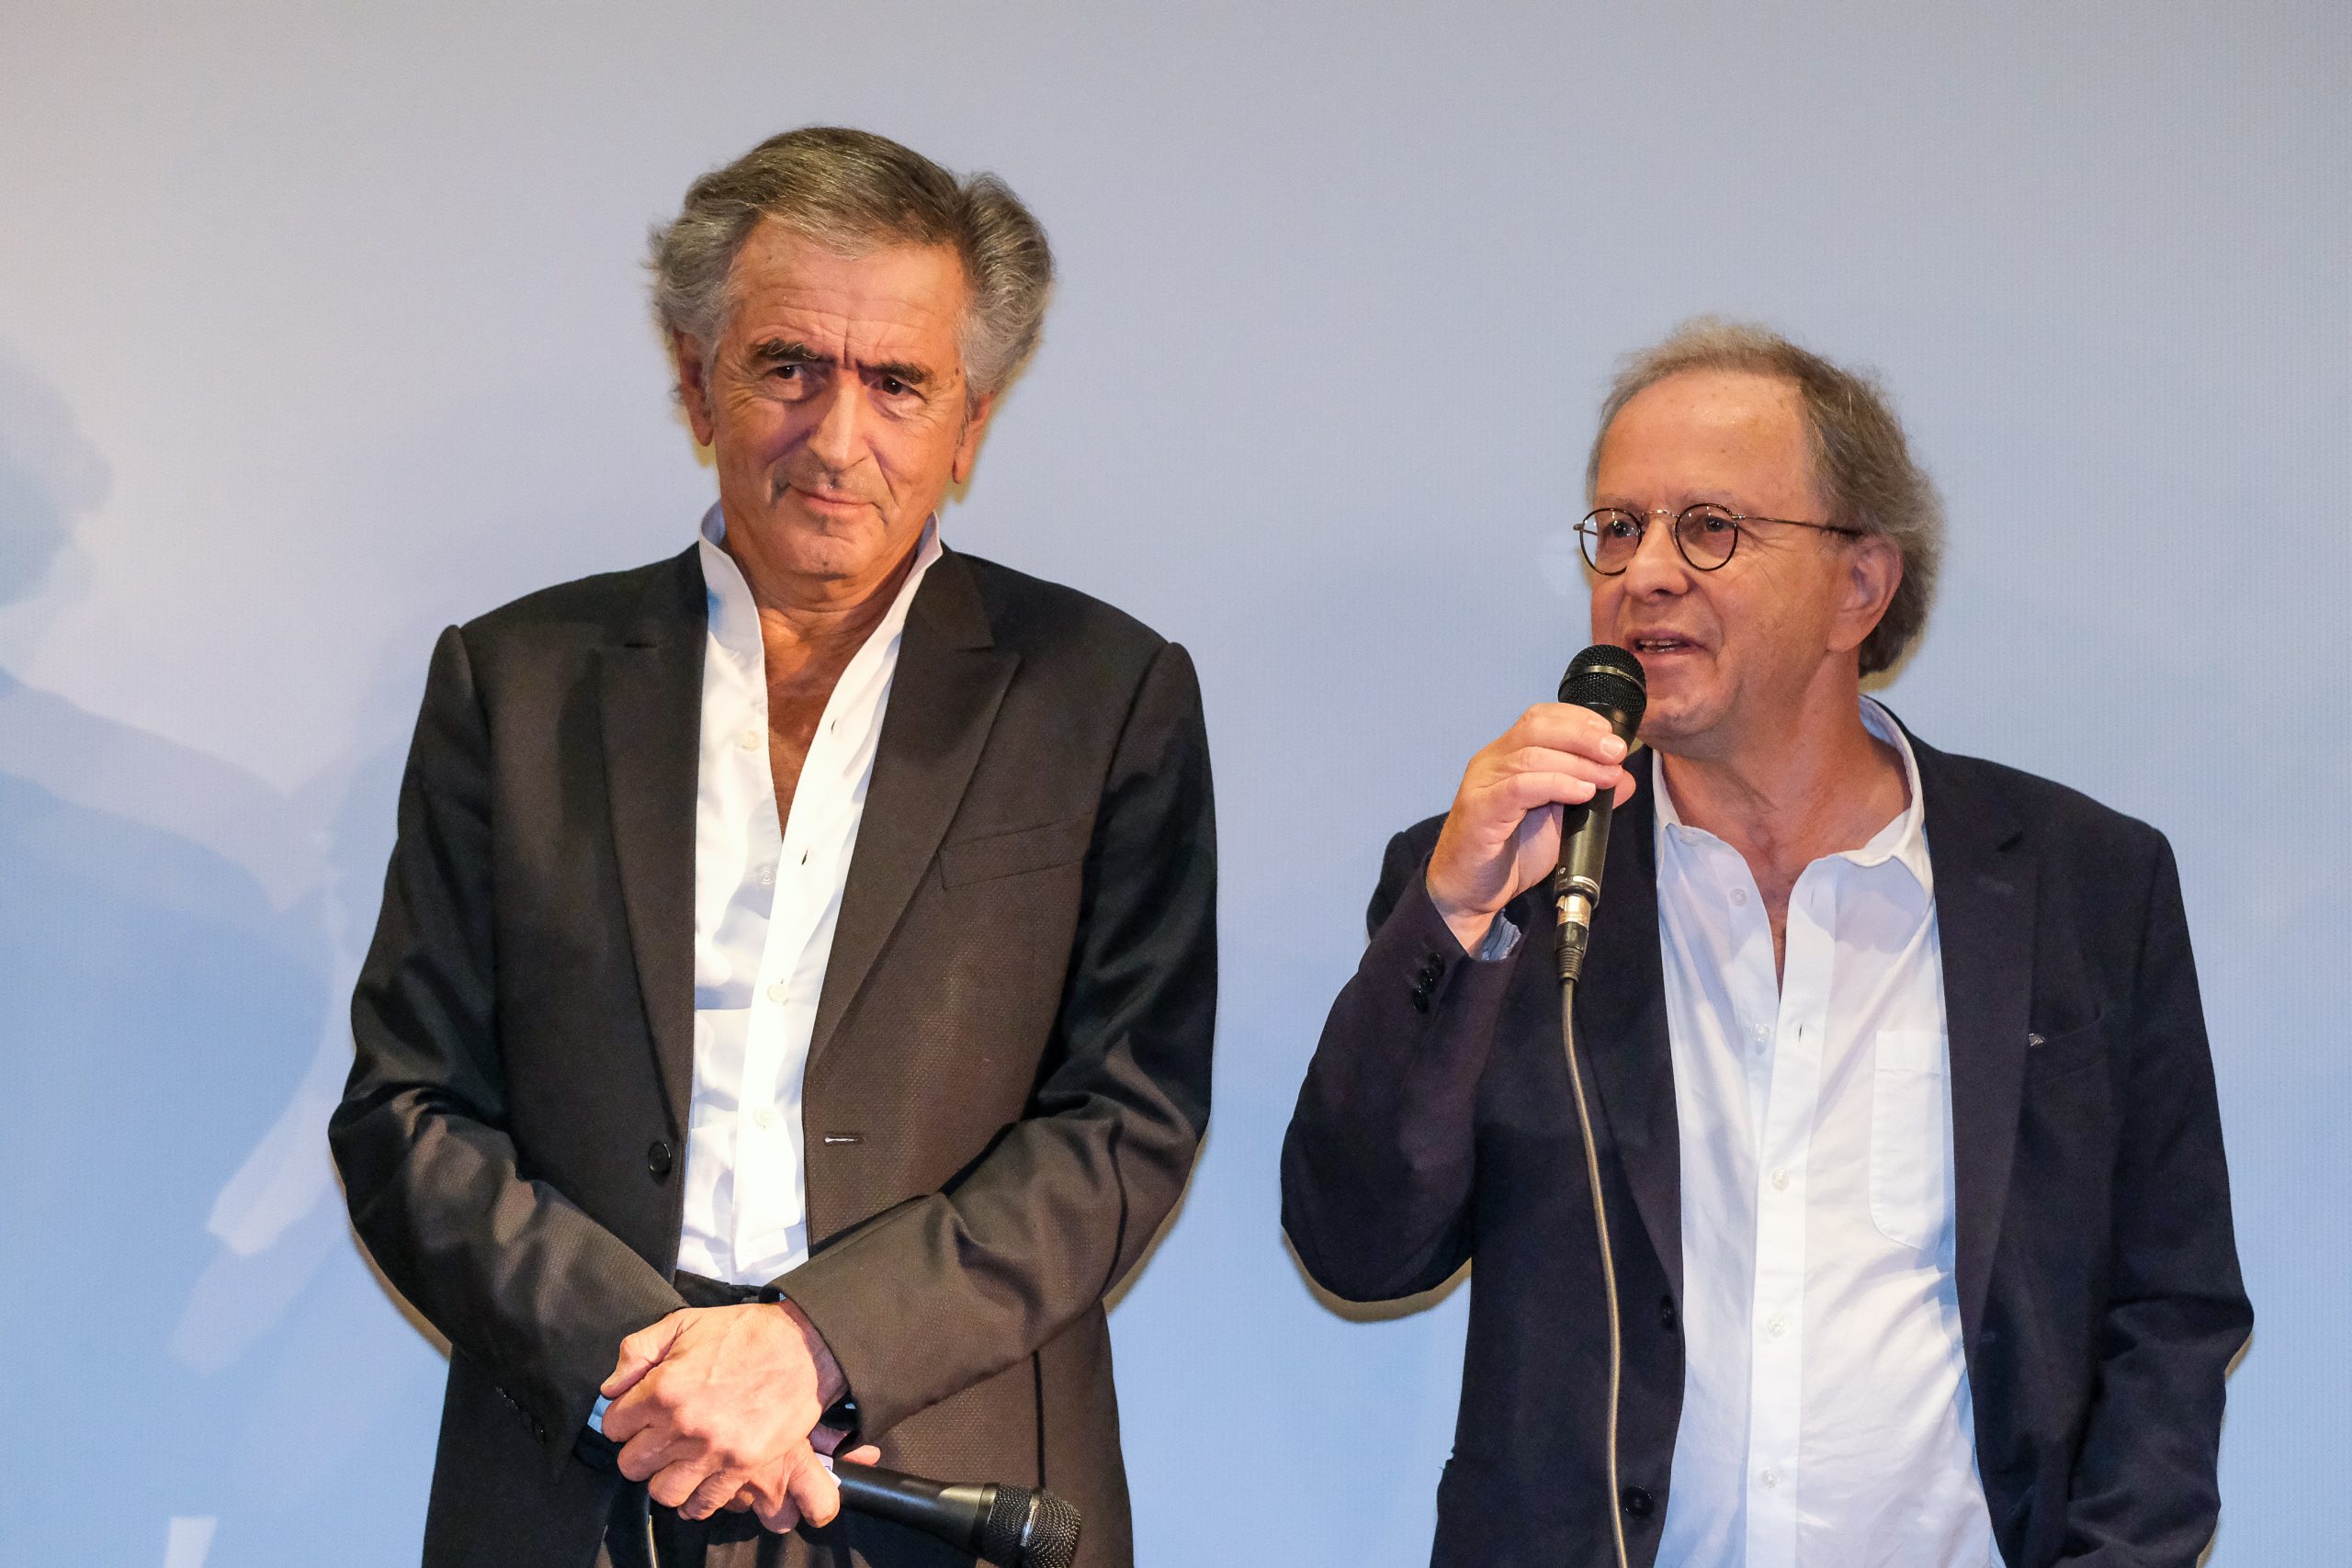 Bernard-Henri Lévy and François Margolin, at the preview of BHL's film "Why Ukraine", at the Cinéma Le Balzac in Paris.